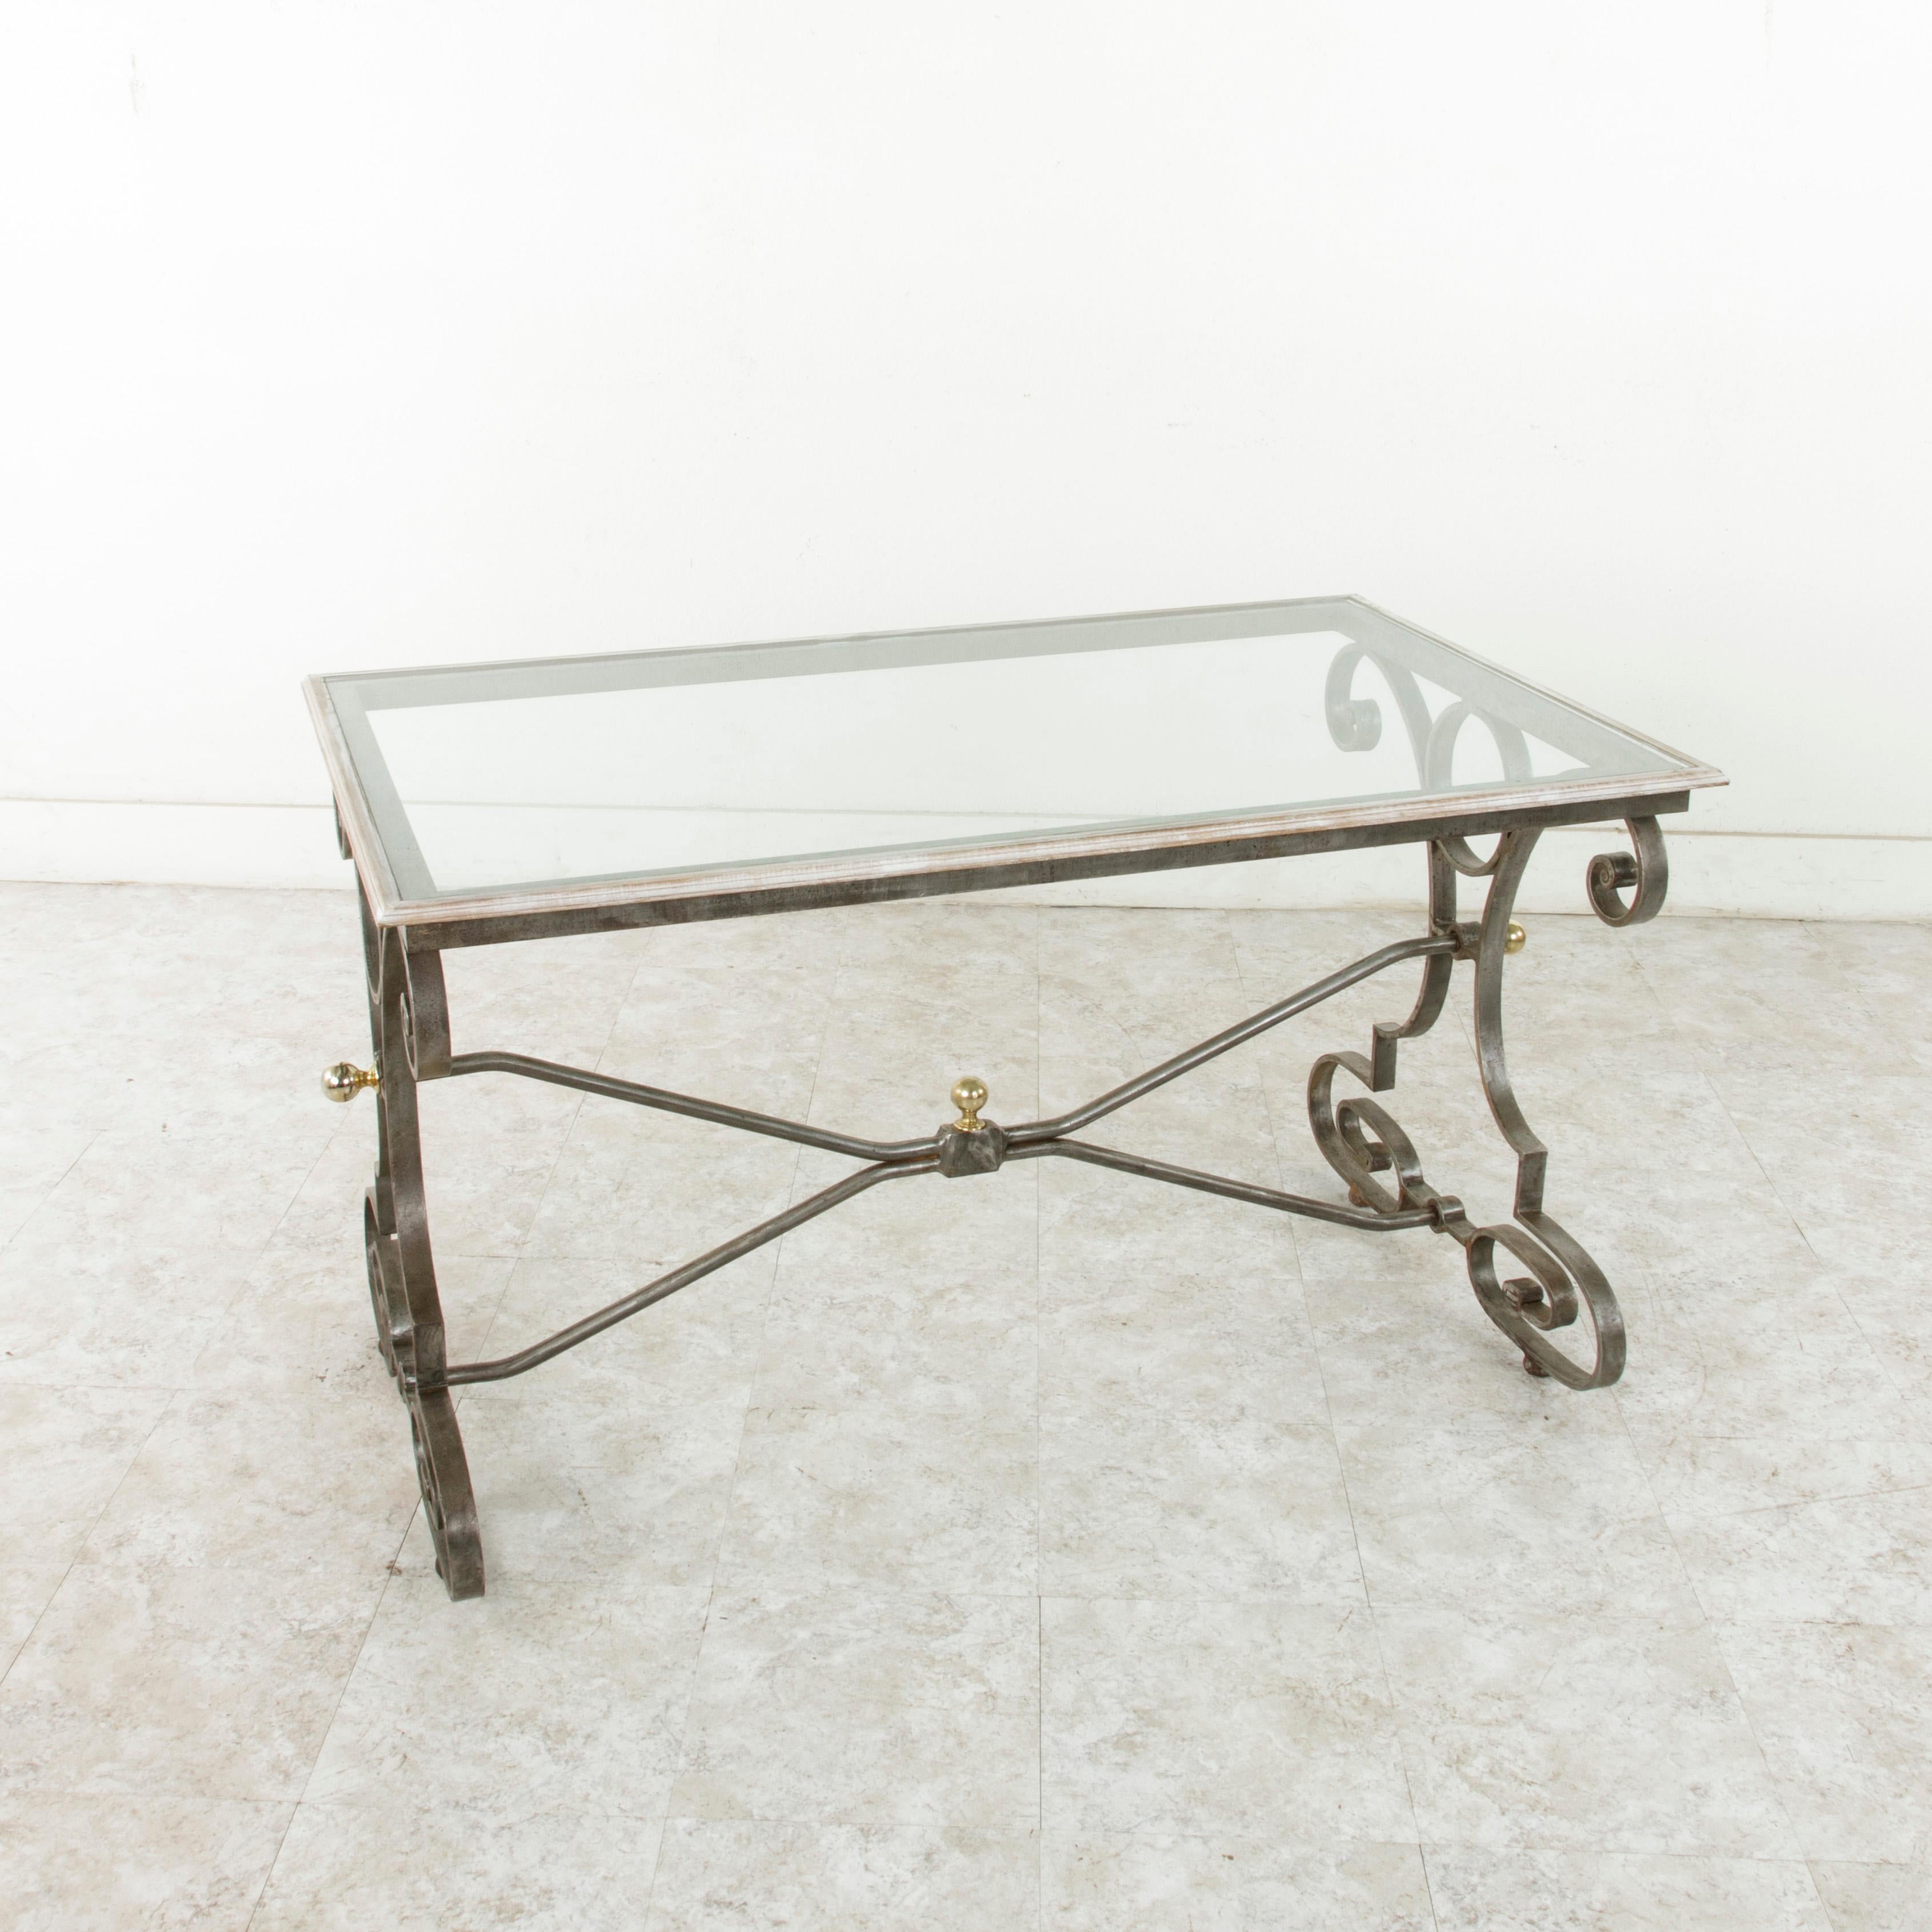 Wood Mid 20th Century French Wrought Iron and Bronze Outdoor Dining Table, Glass Top